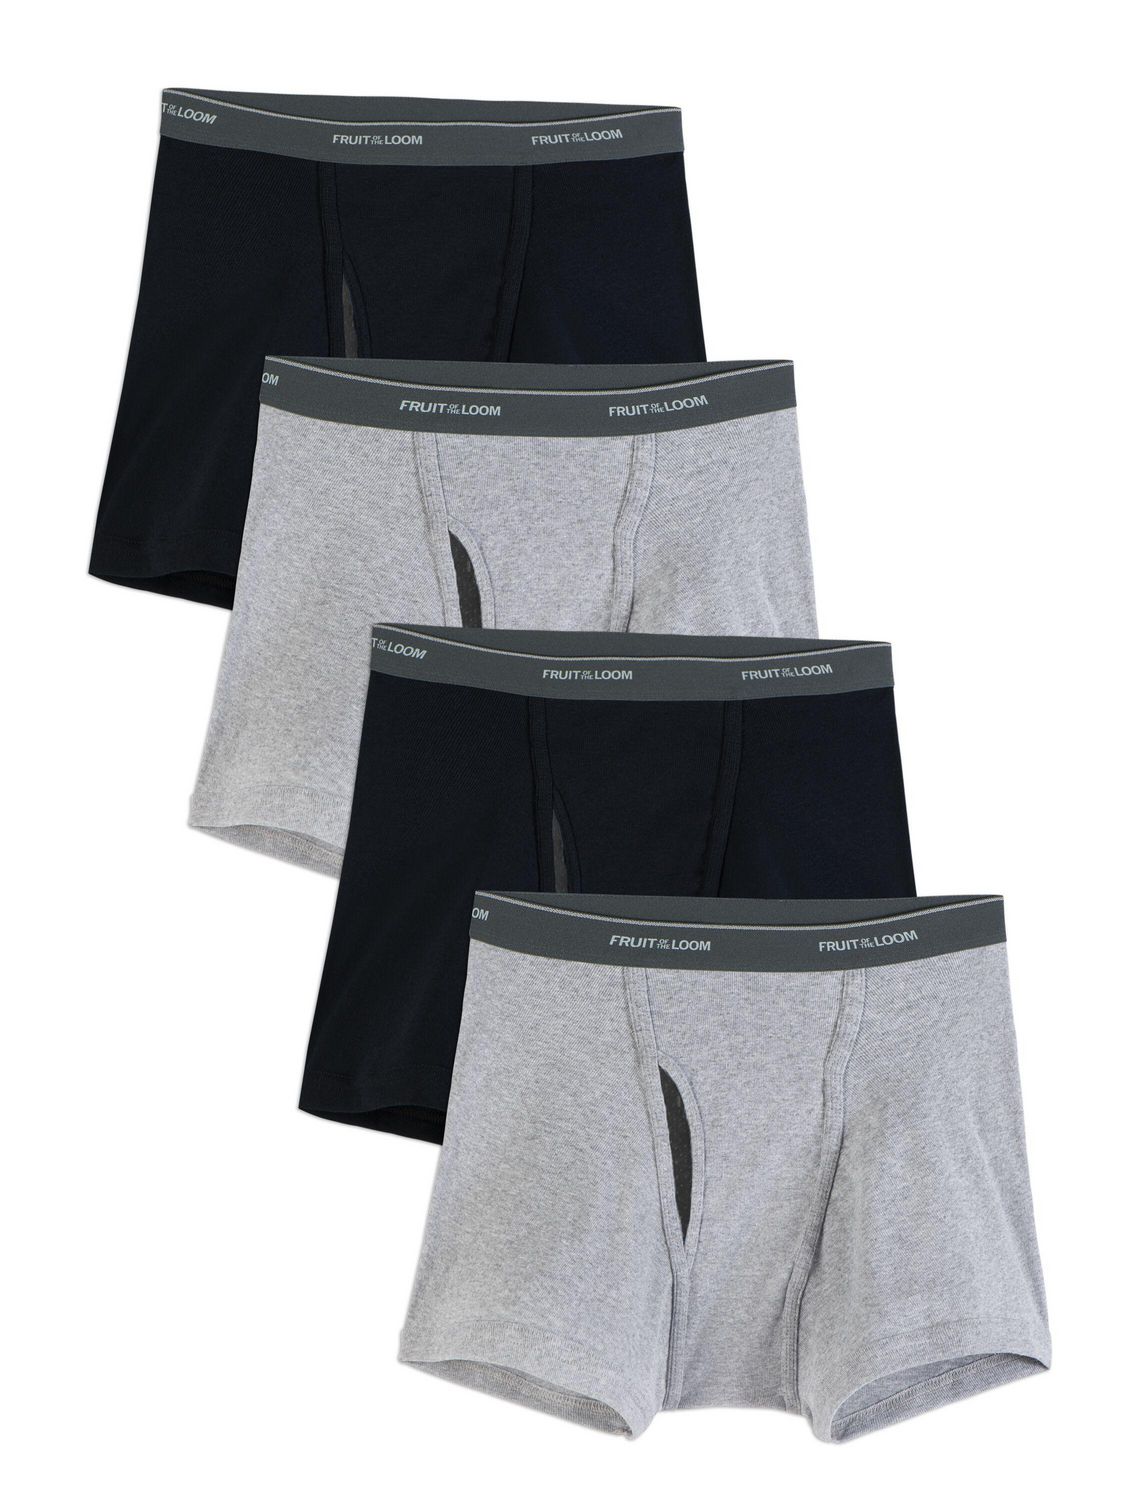 Fruit of the Loom Mens Trunk Briefs, 4-Pack | Walmart Canada